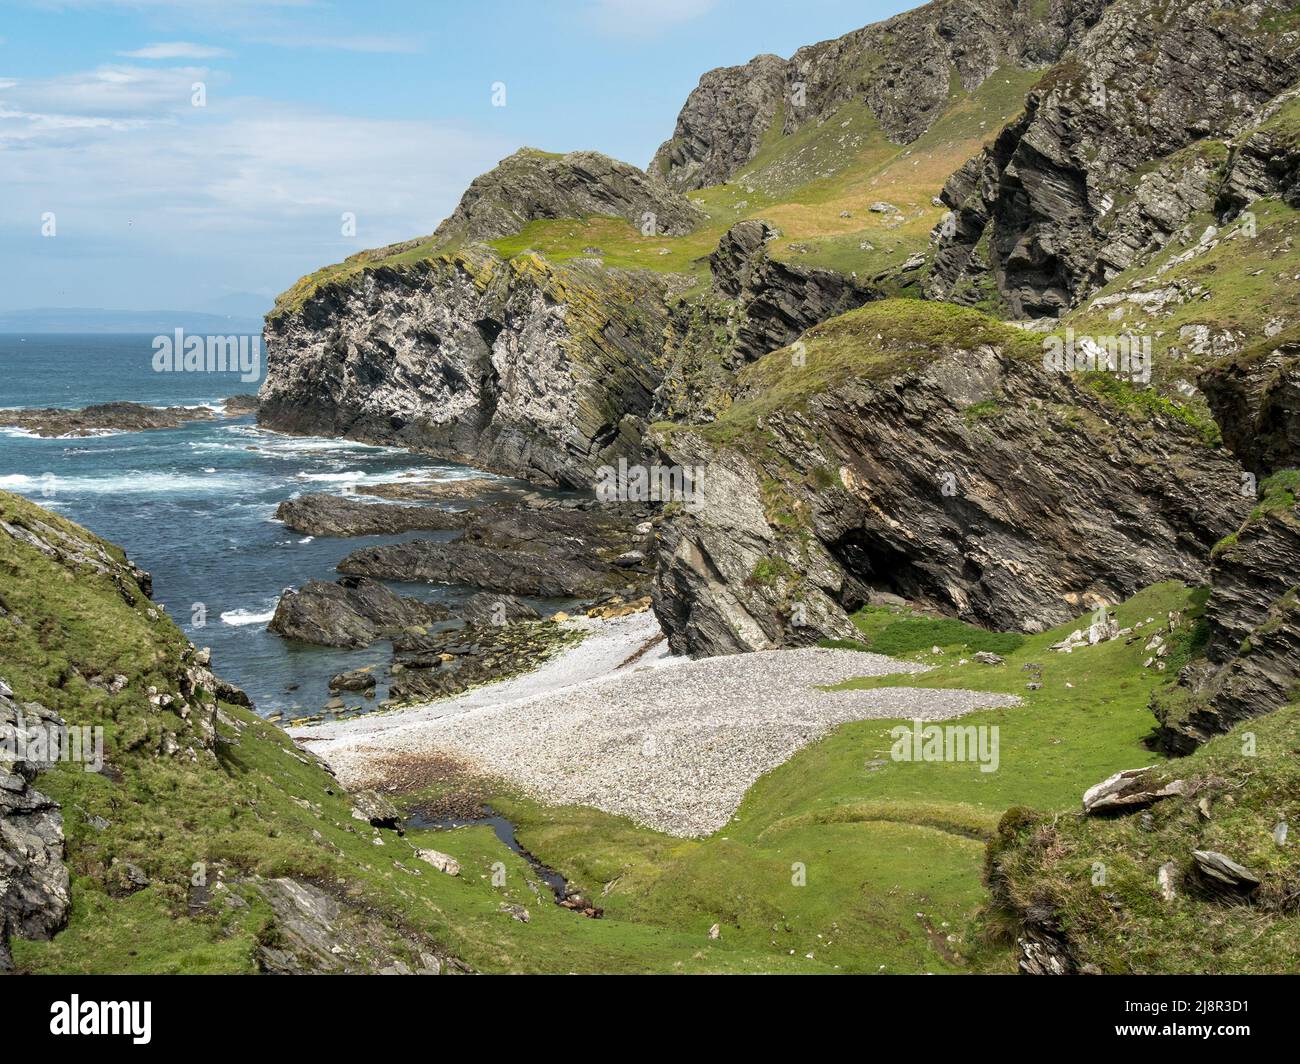 Sea cliffs and pebble beach at Port Ban near Pigs Paradise on the Hebridean Island of Colonsay, Scotland, UK Stock Photo